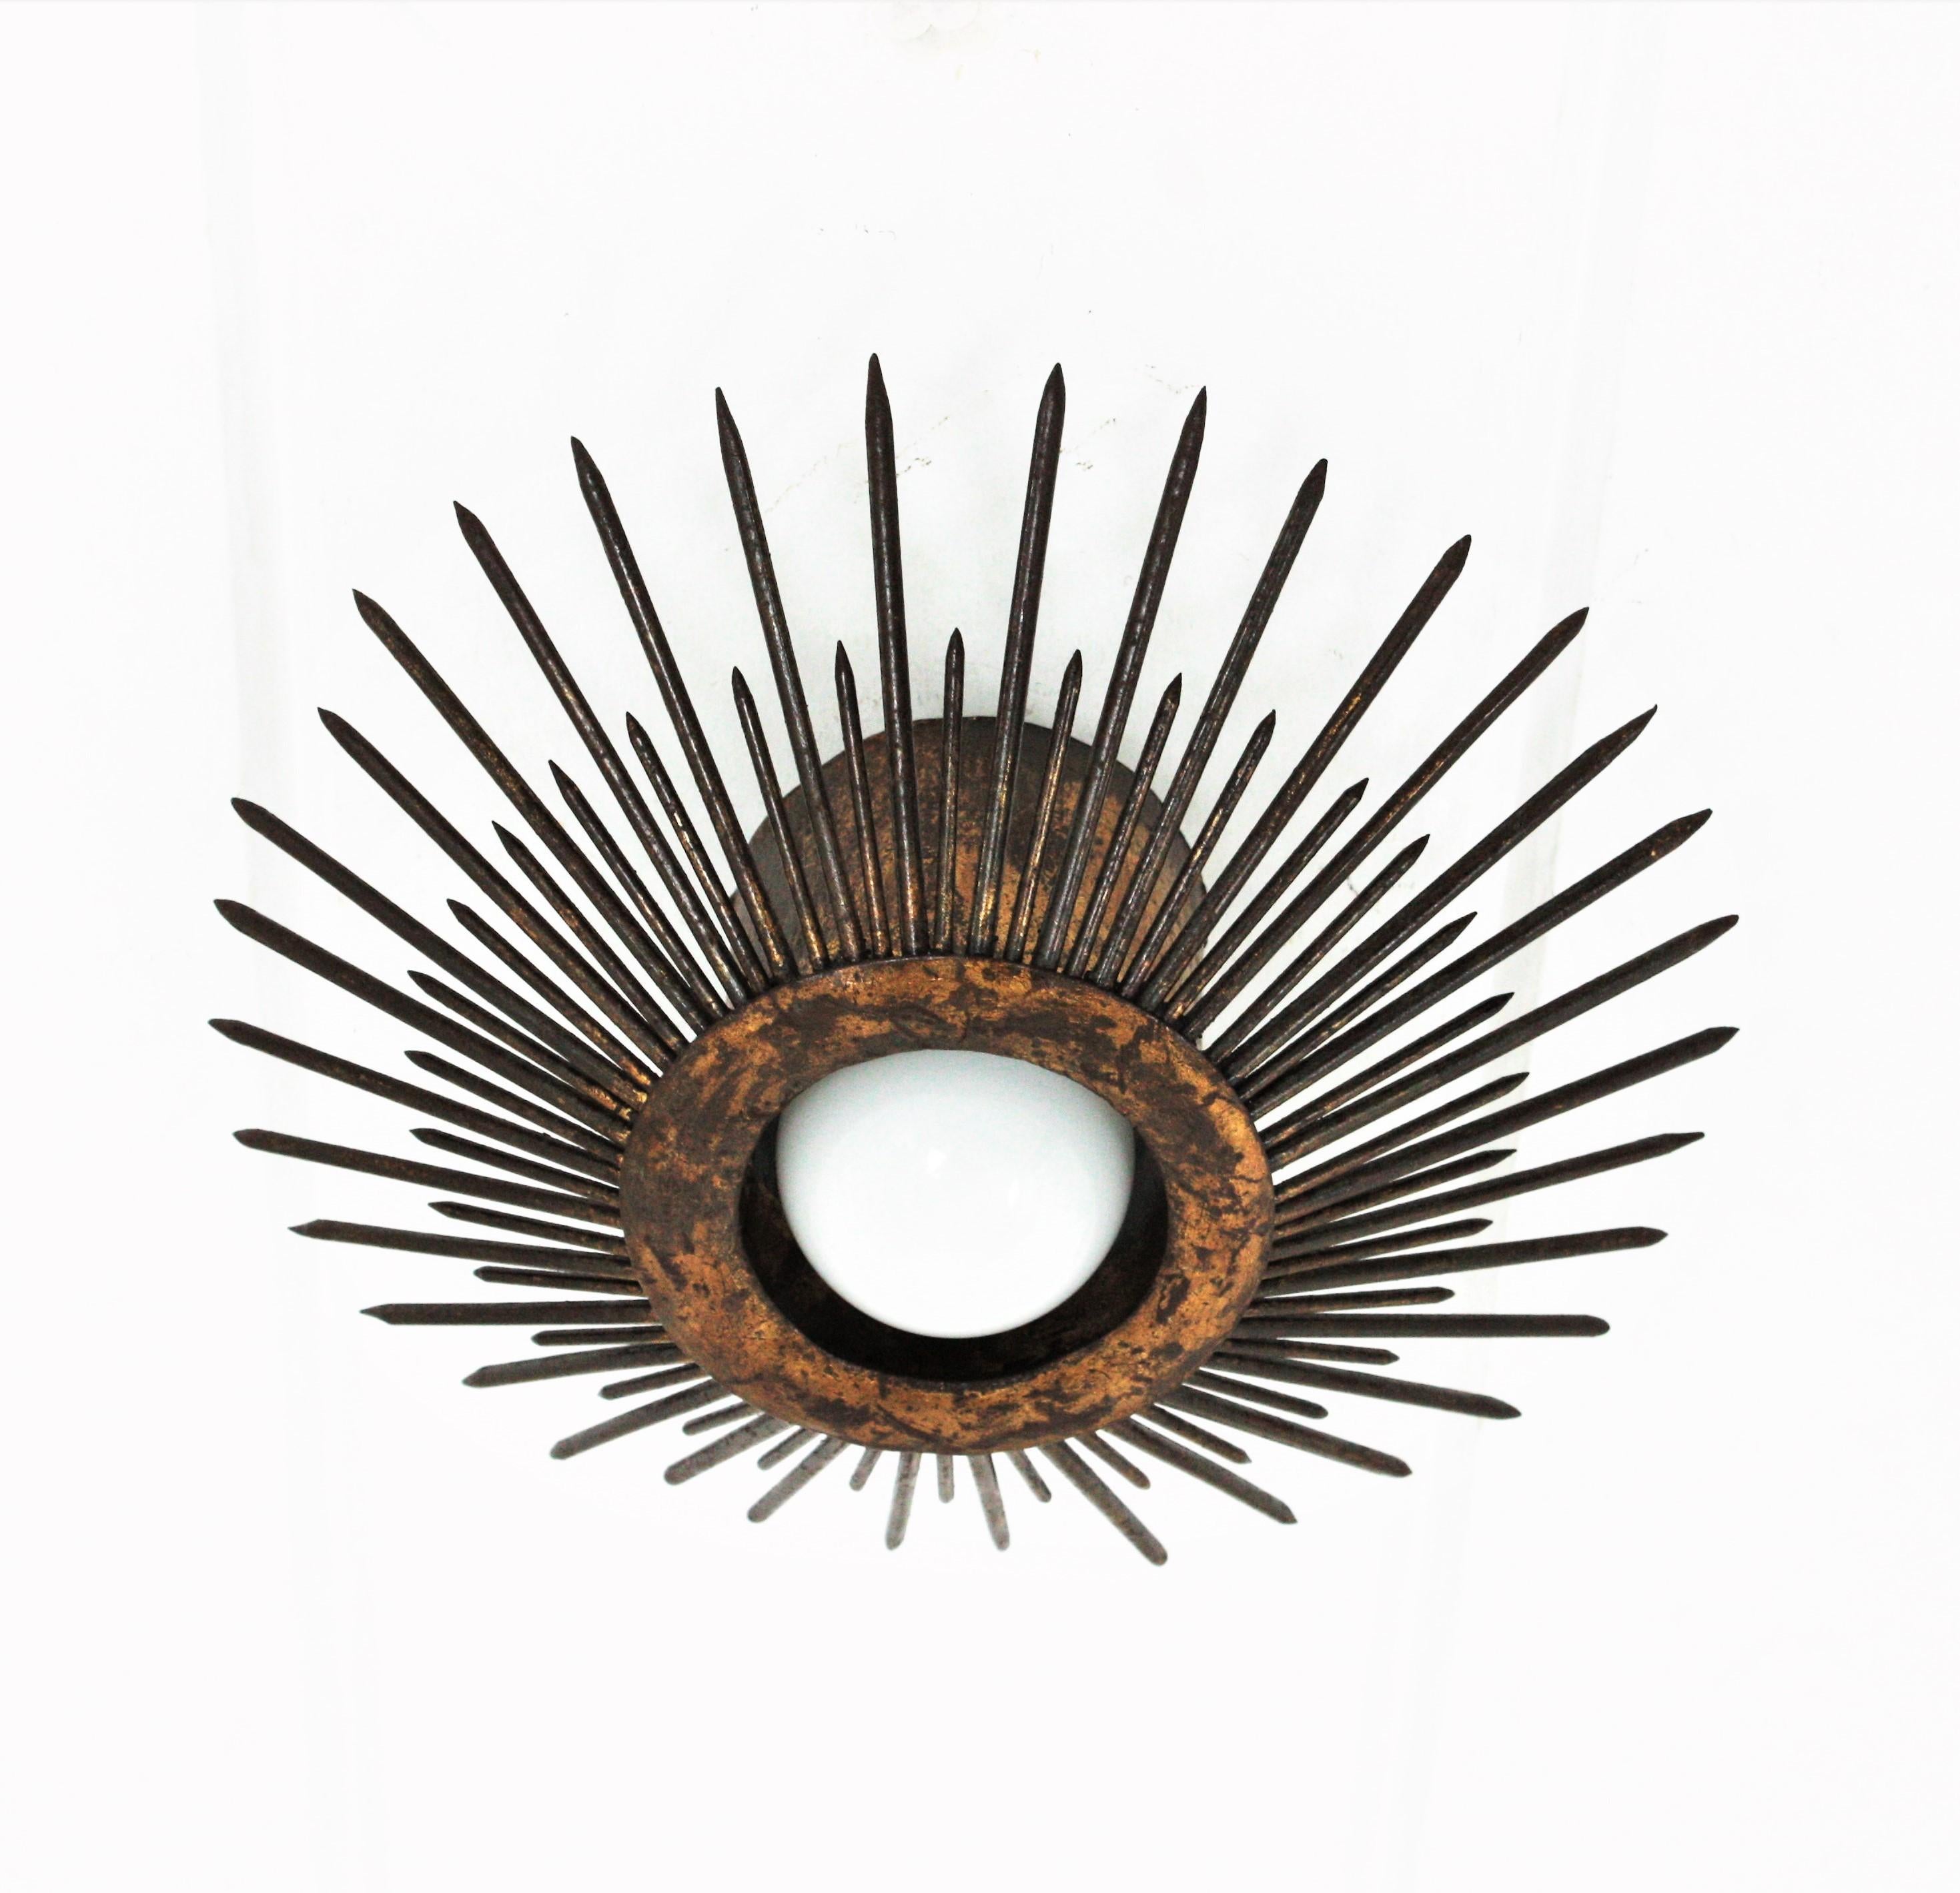 Pair of Gilt Iron Sunburst Brutalist Light Fixtures with Design of Nails In Good Condition For Sale In Barcelona, ES